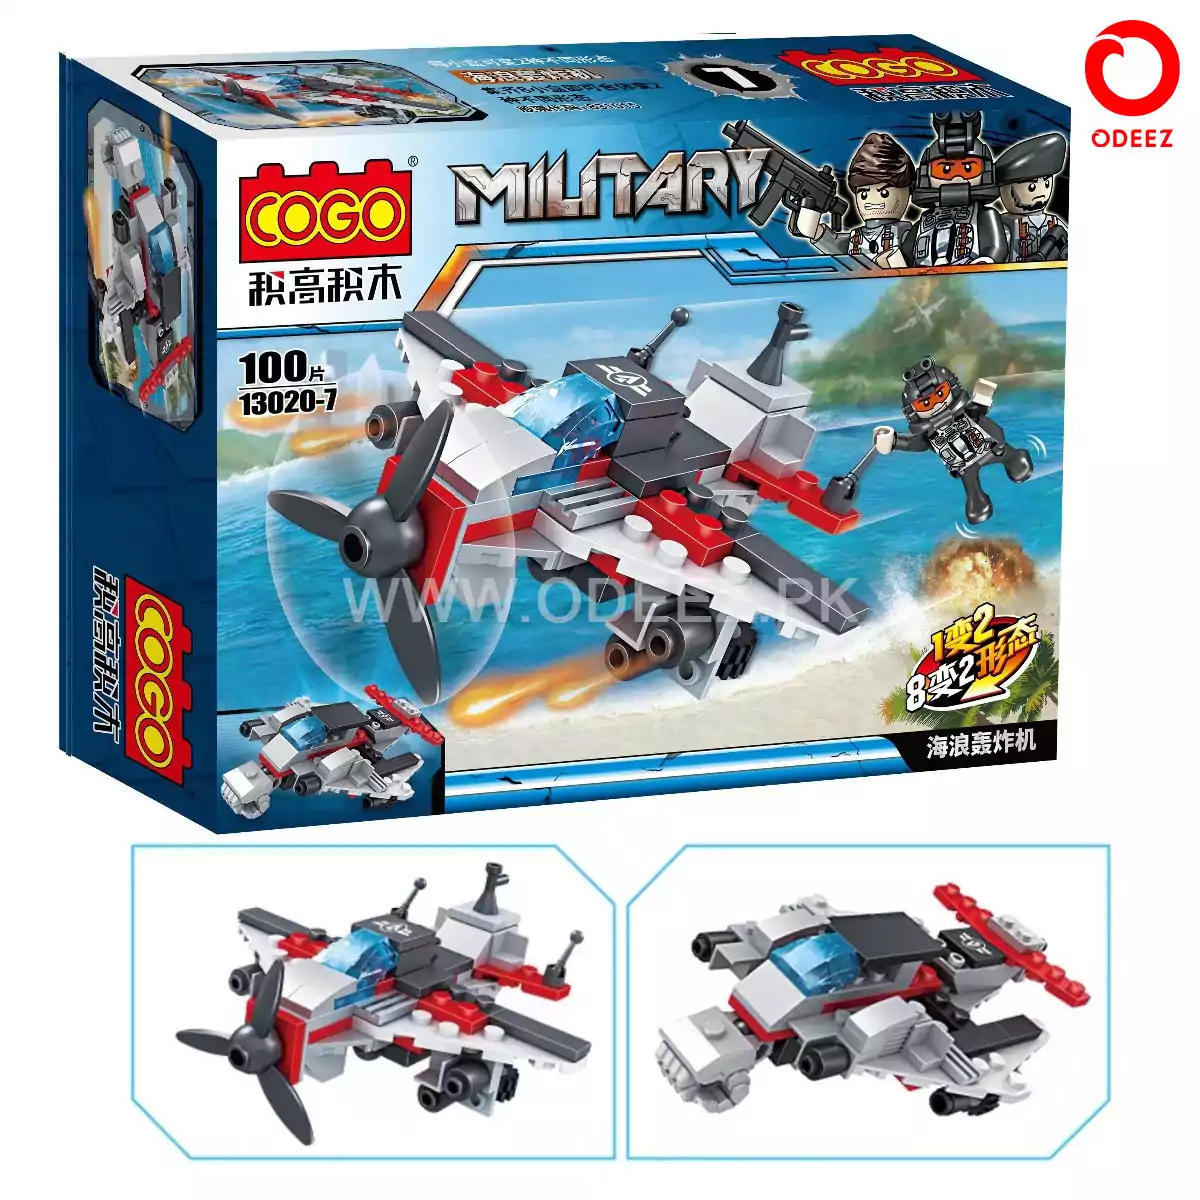 Cogo Military Bomber 2 in 1 - 100 Pieces